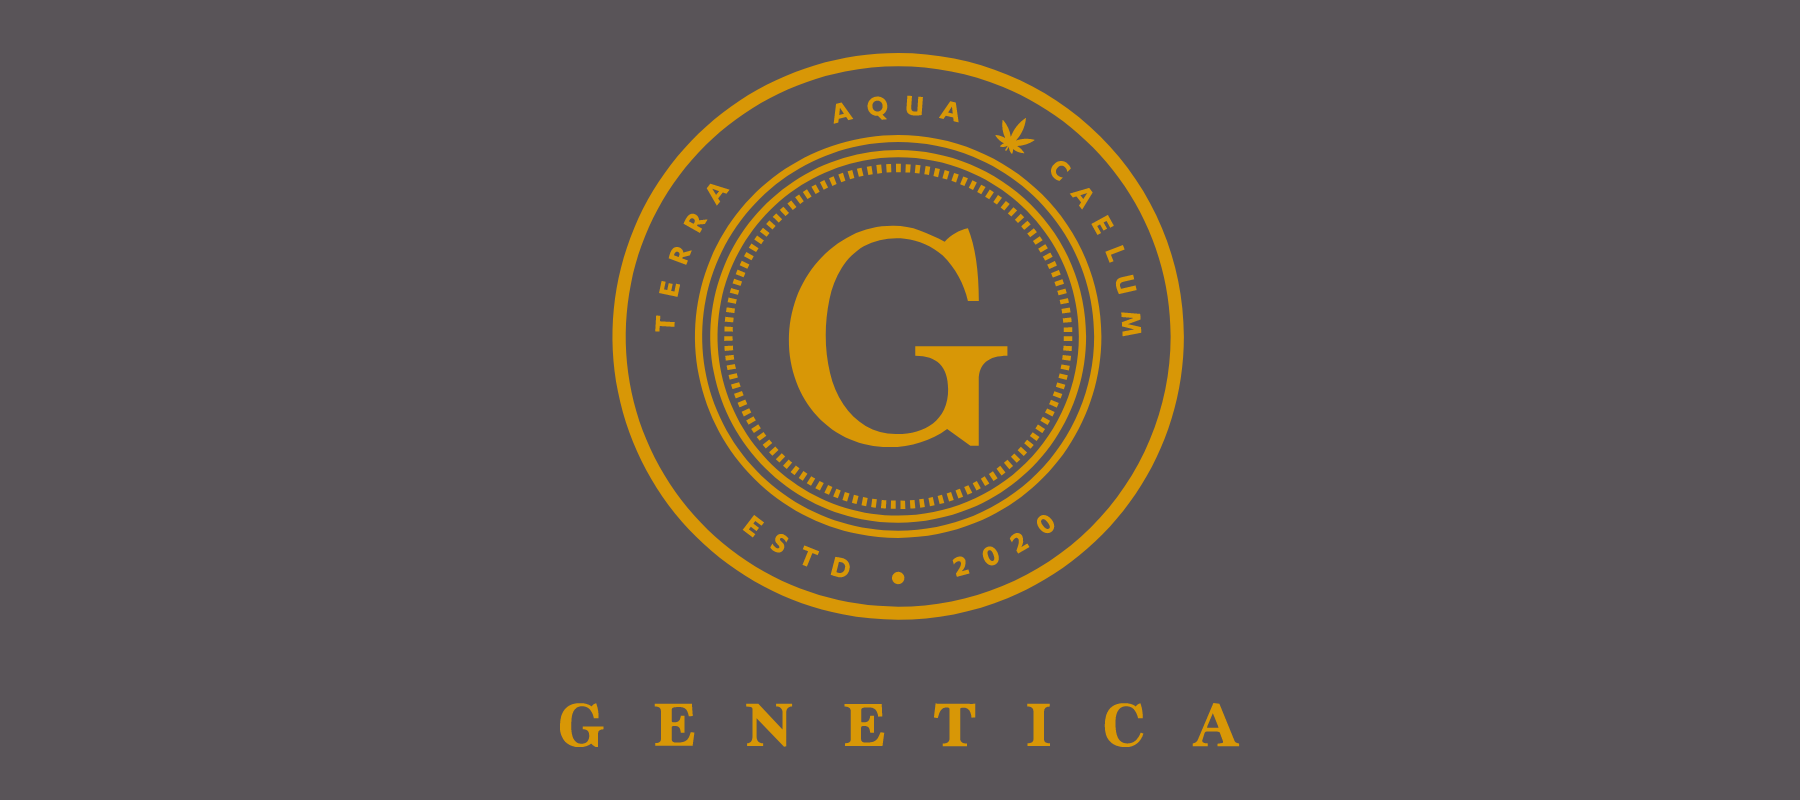 Genetica raises $500k seed round to make cannabis shopping smarter with AI